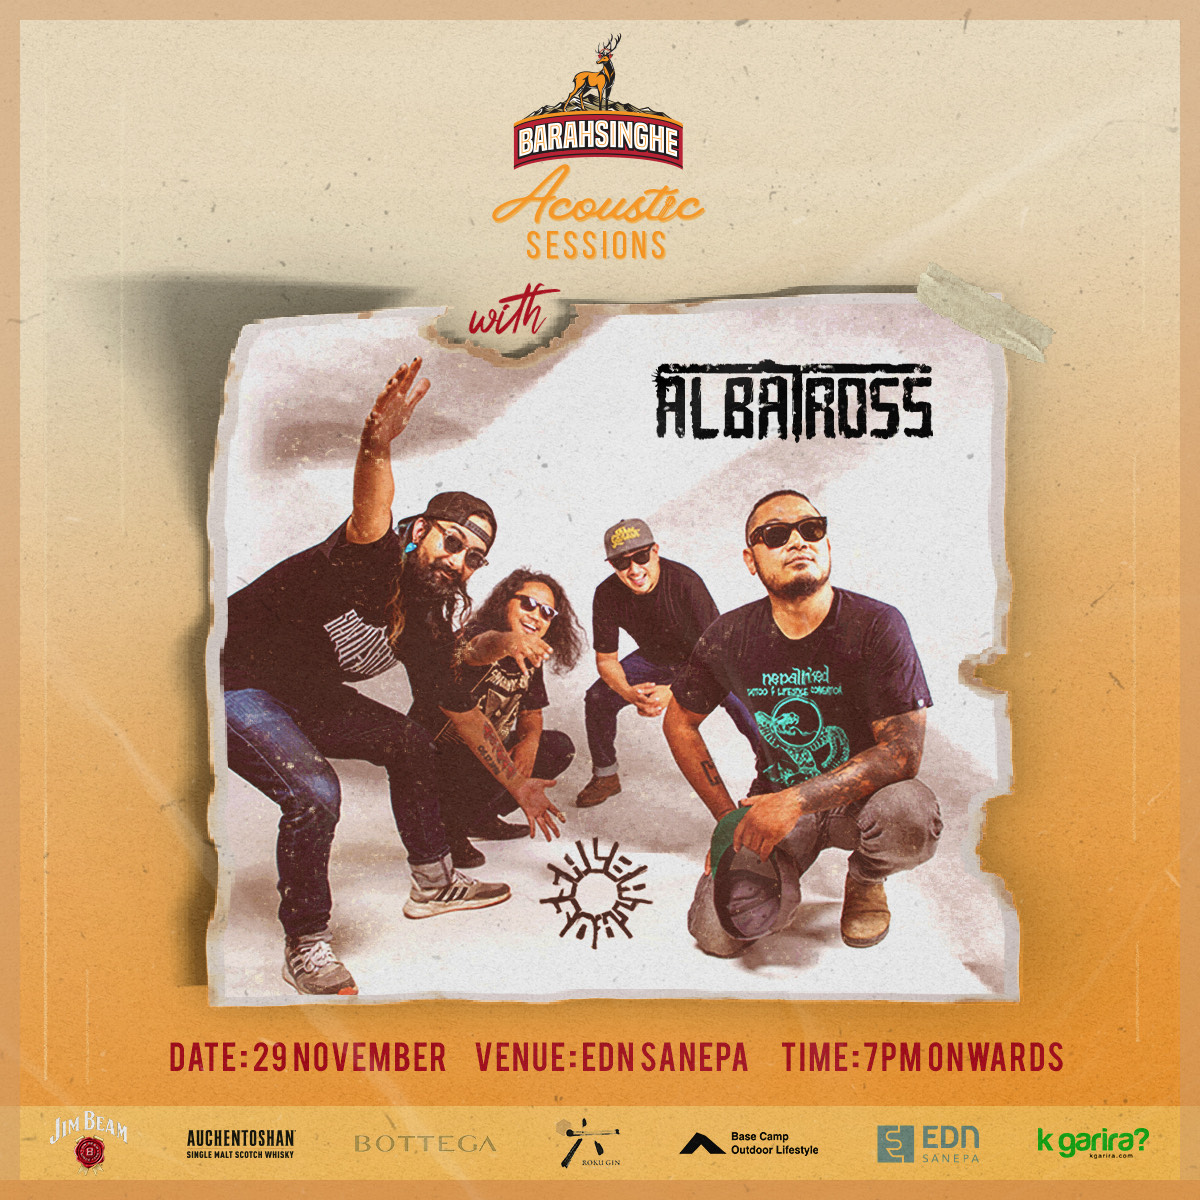 Barahsinghe Acoustic Sessions with Albatross